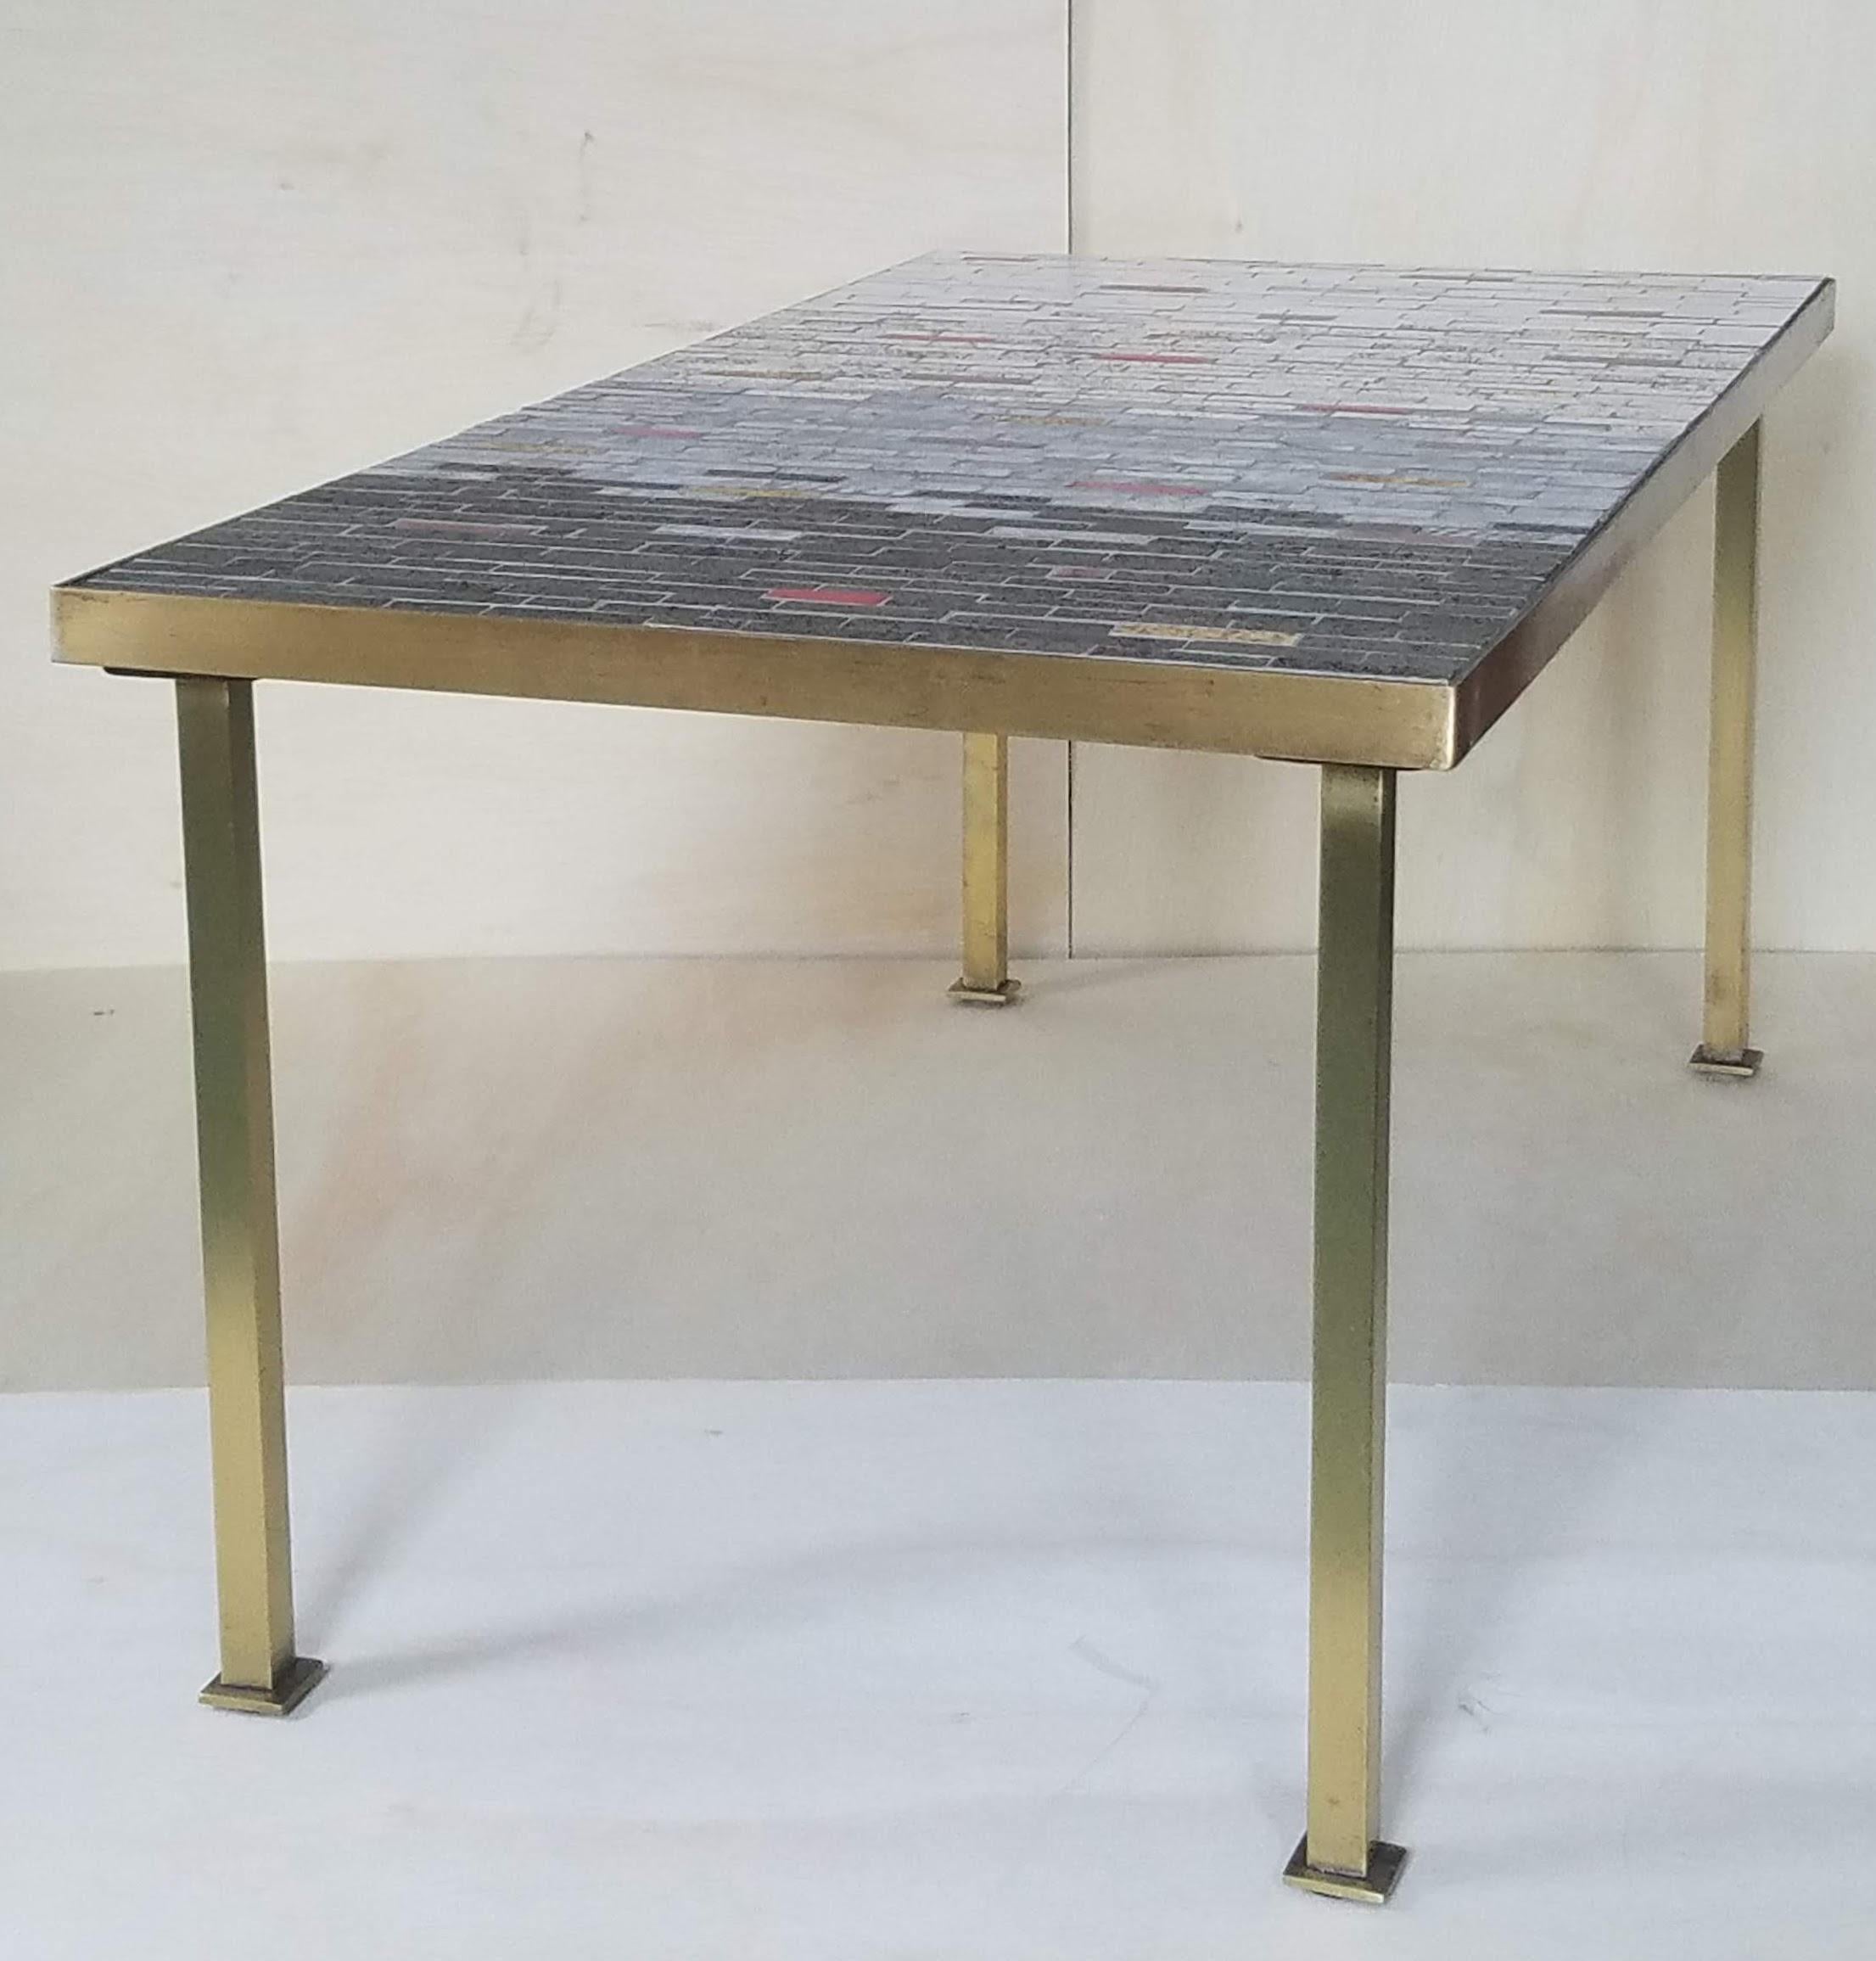 An early 1950's custom designed coffee table created at the Clay Mosaics & Ceramics, Inc. studio which was located at 432 East 82nd Street in New York.
The gradual change of the color from white to charcoal grey is an interesting design.
The